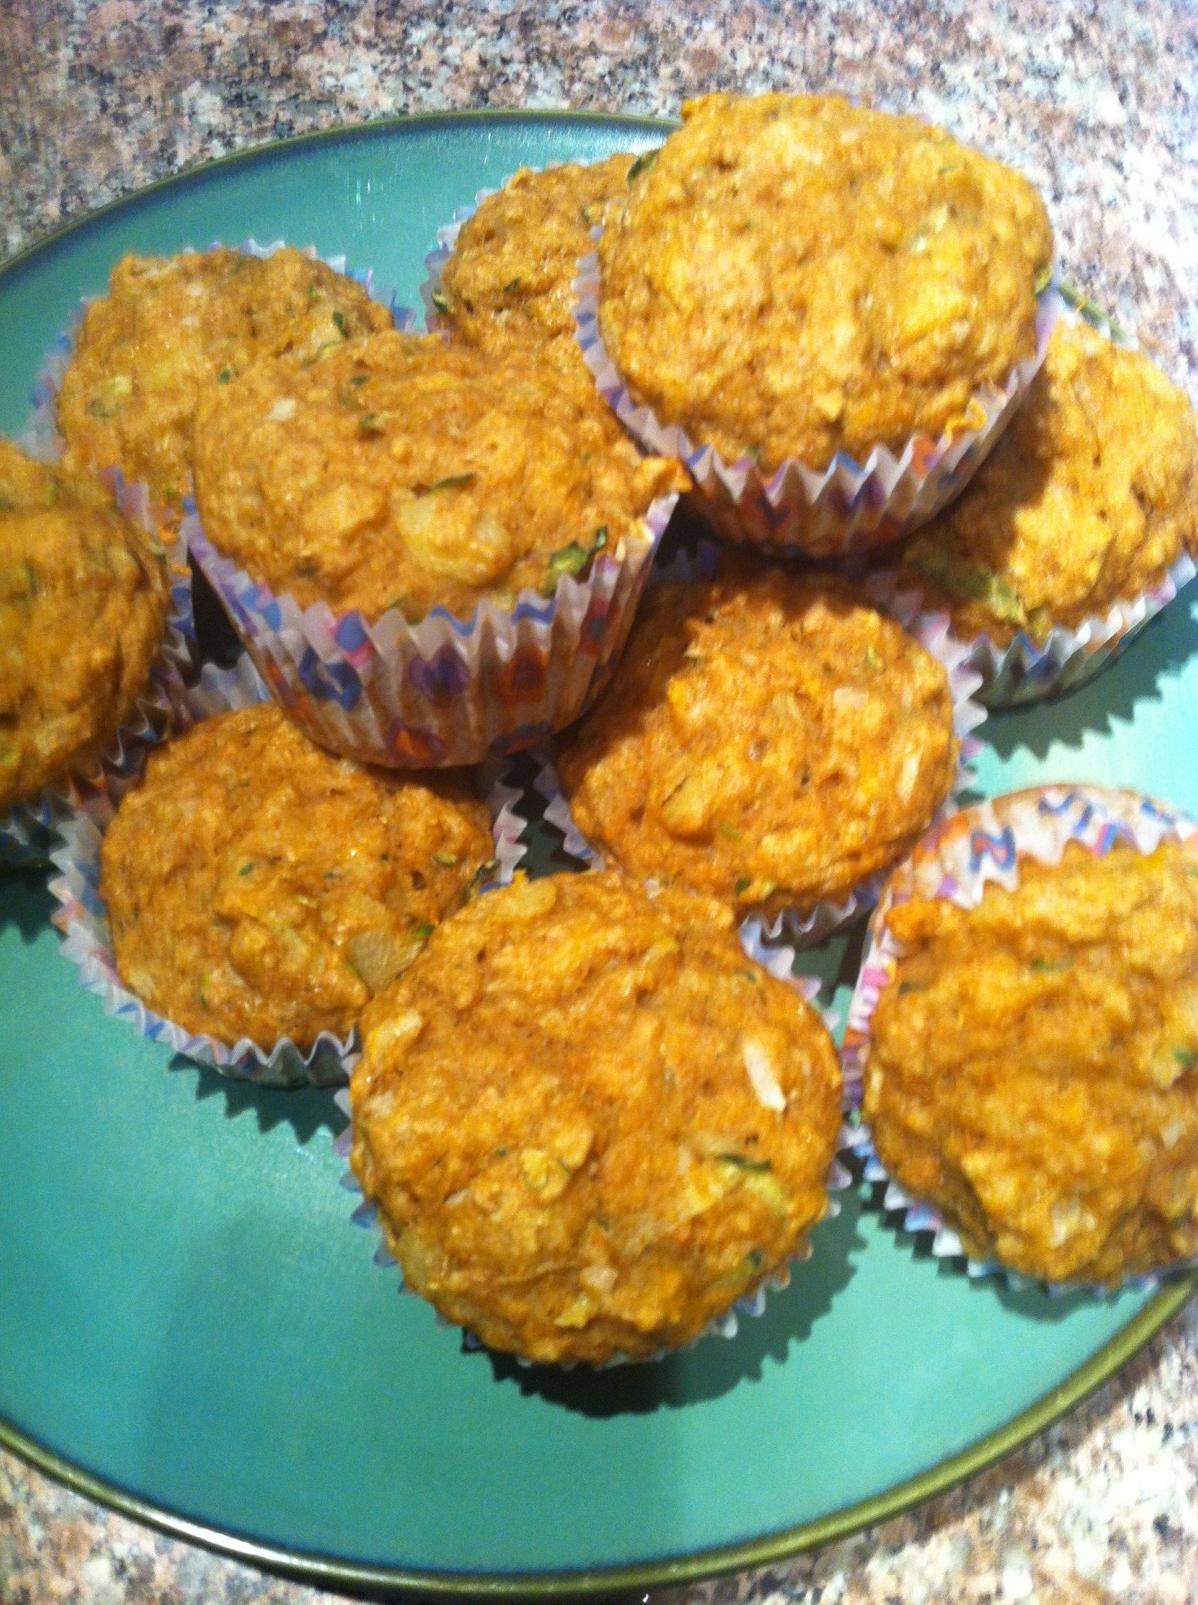  Don't let the name fool you--these muffins are just as delicious as the non-vegan version.